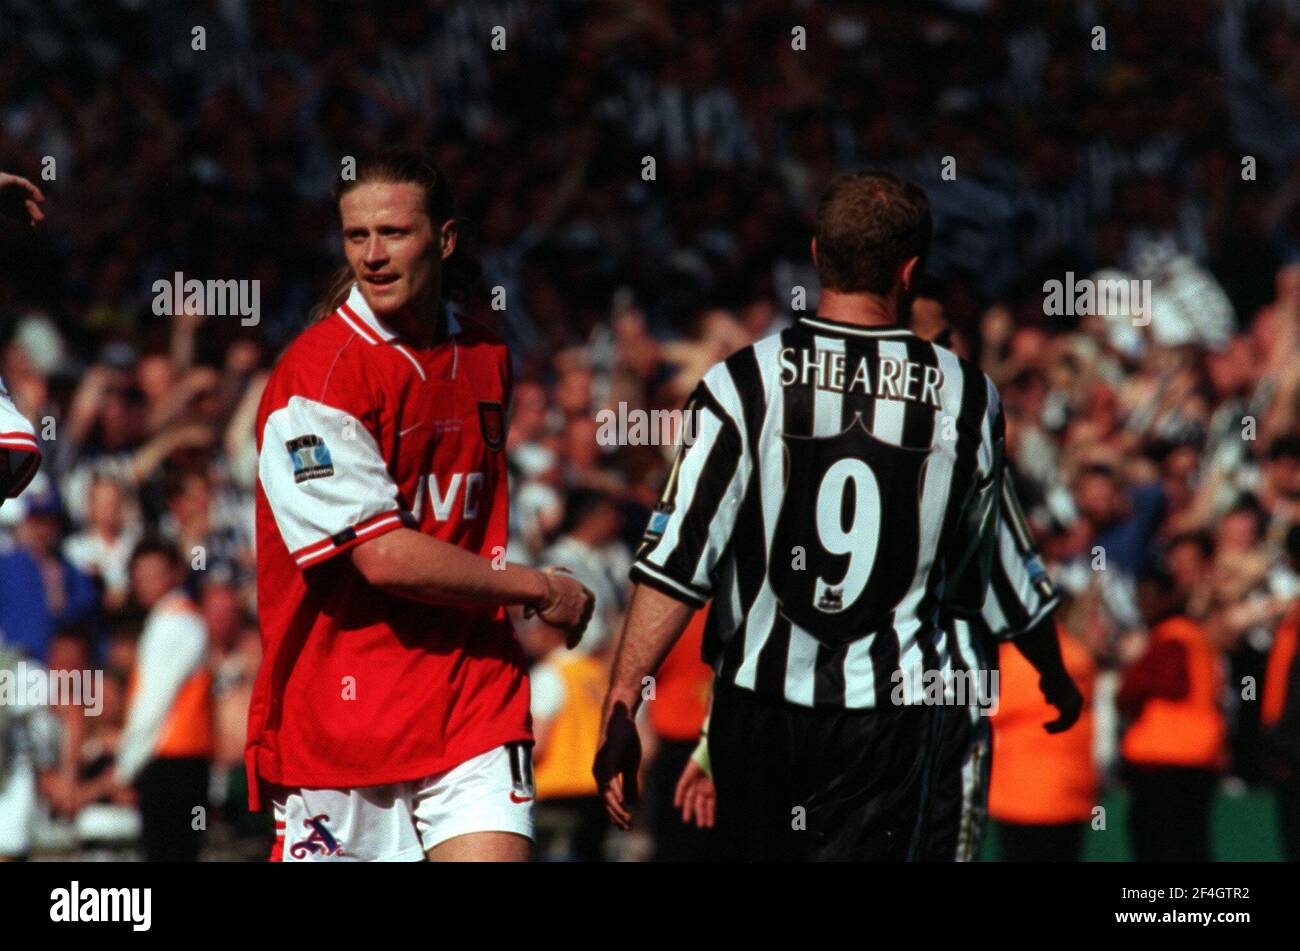 fa-cup-final-arsenal-v-newcastle-united-may1998emanuelle-petit-shakes-hands-with-newcastles-alan-shearer-at-the-end-of-the-fa-cup-final-arsenal-v-newcastle-united-2F4GTR2.jpg